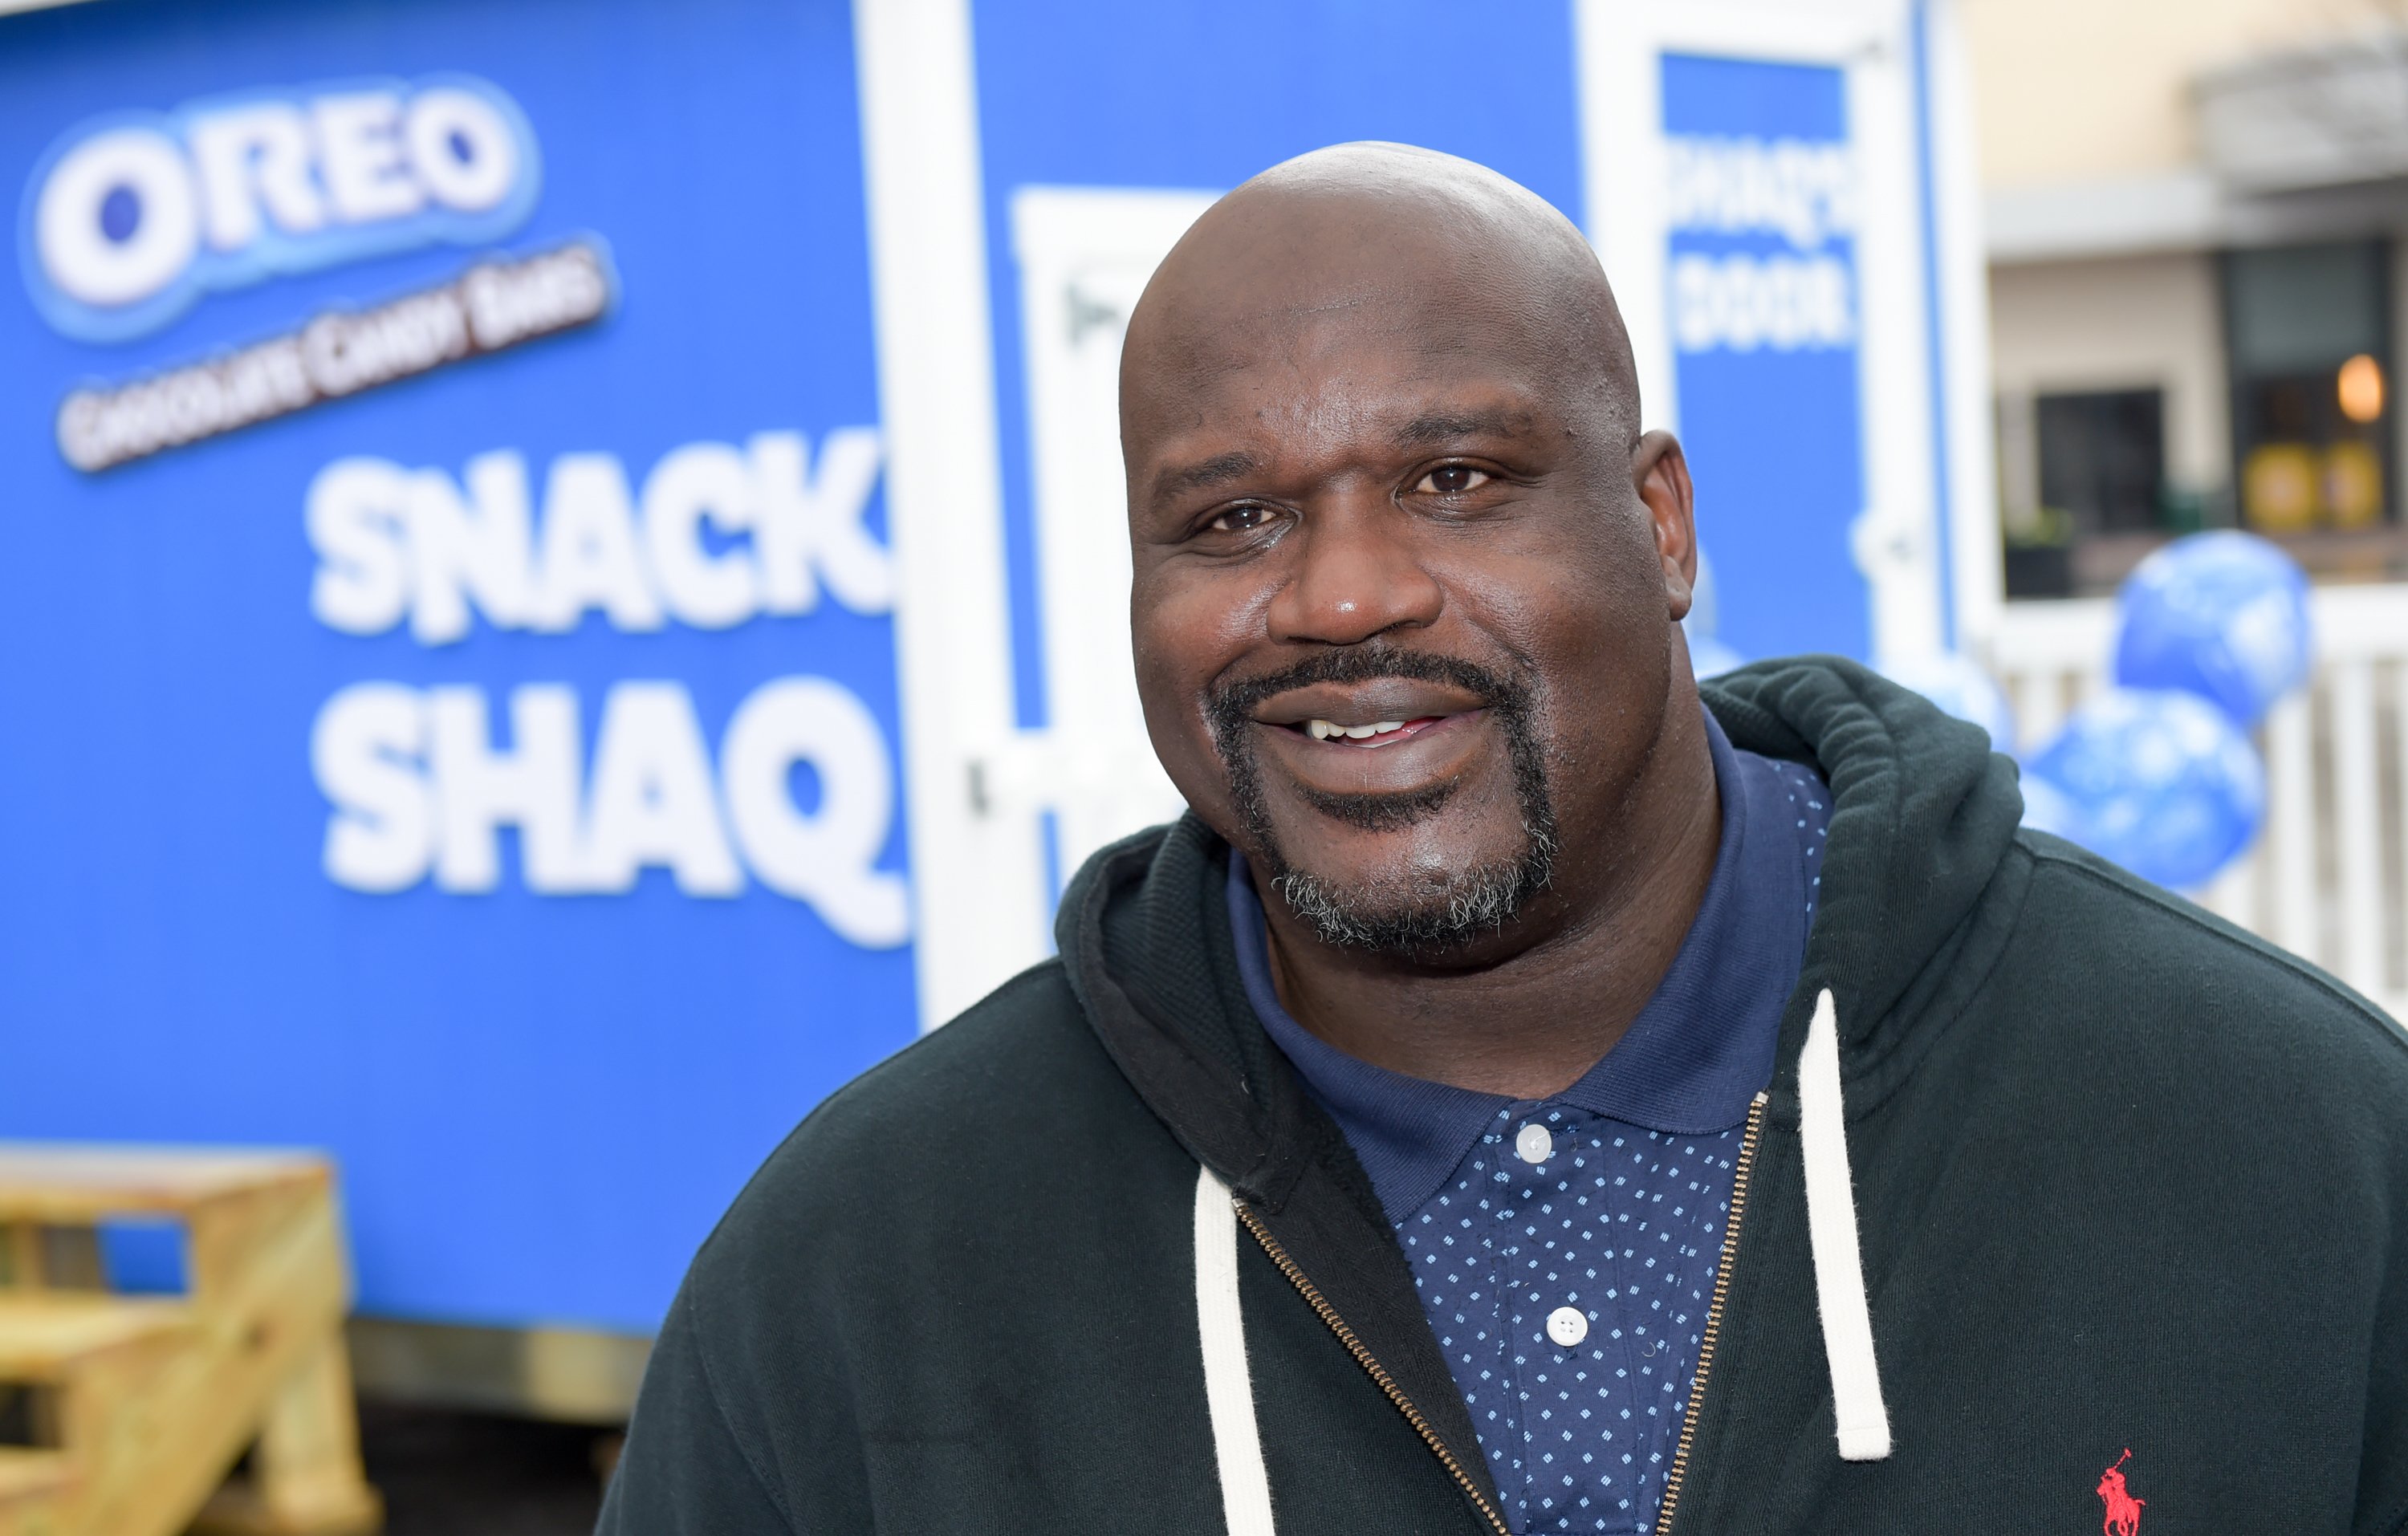 Shaquille ONeal gives away 1 million free OREO Chocolate Candy Bars on March 6, 2018 | Photo: GettyImages